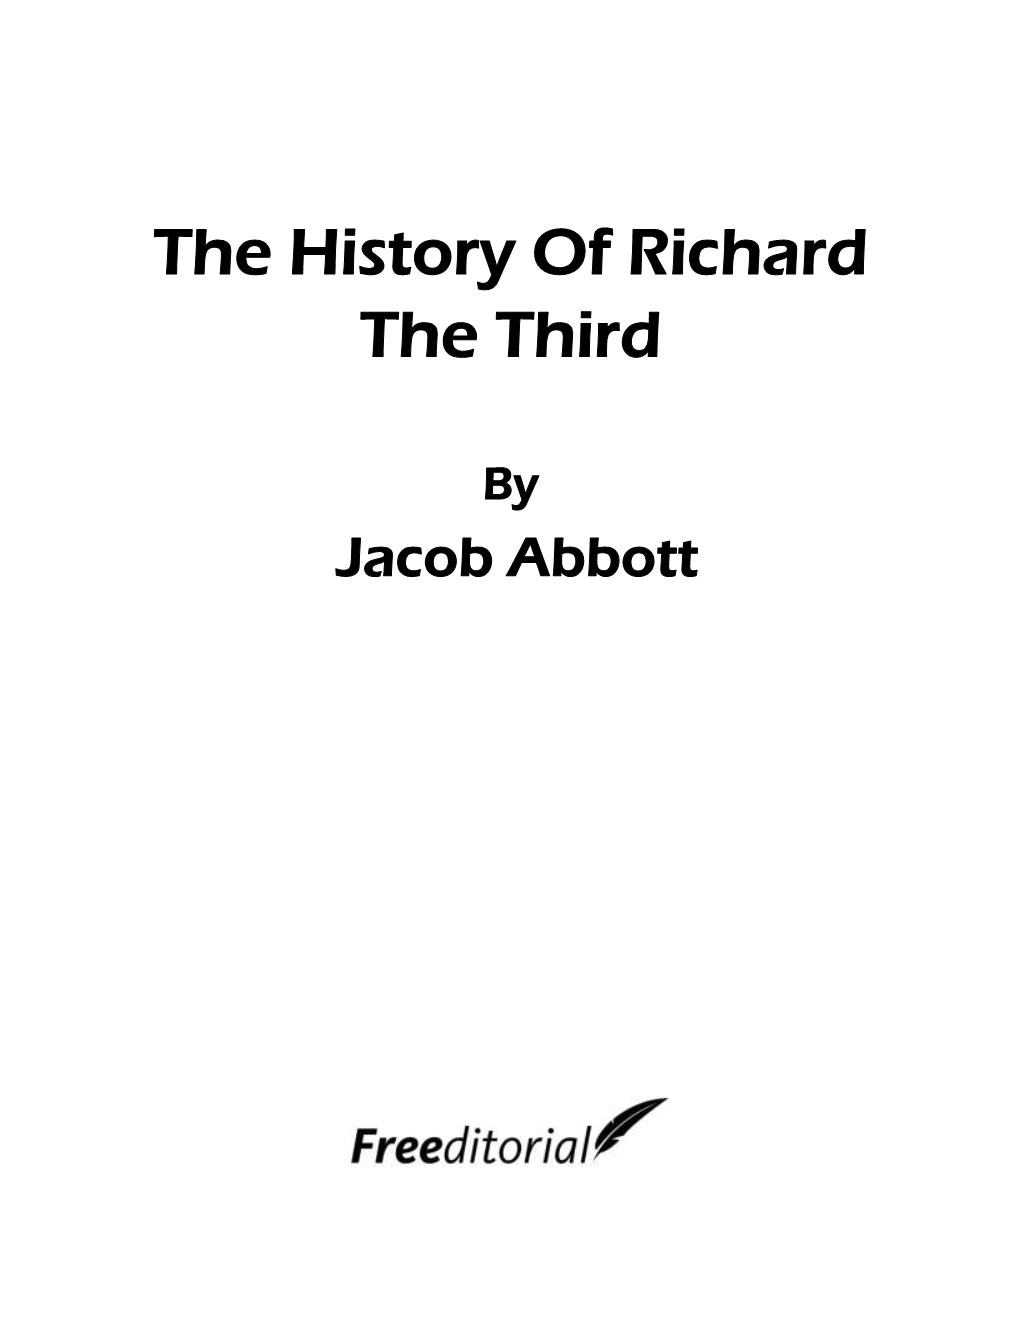 The History of Richard the Third